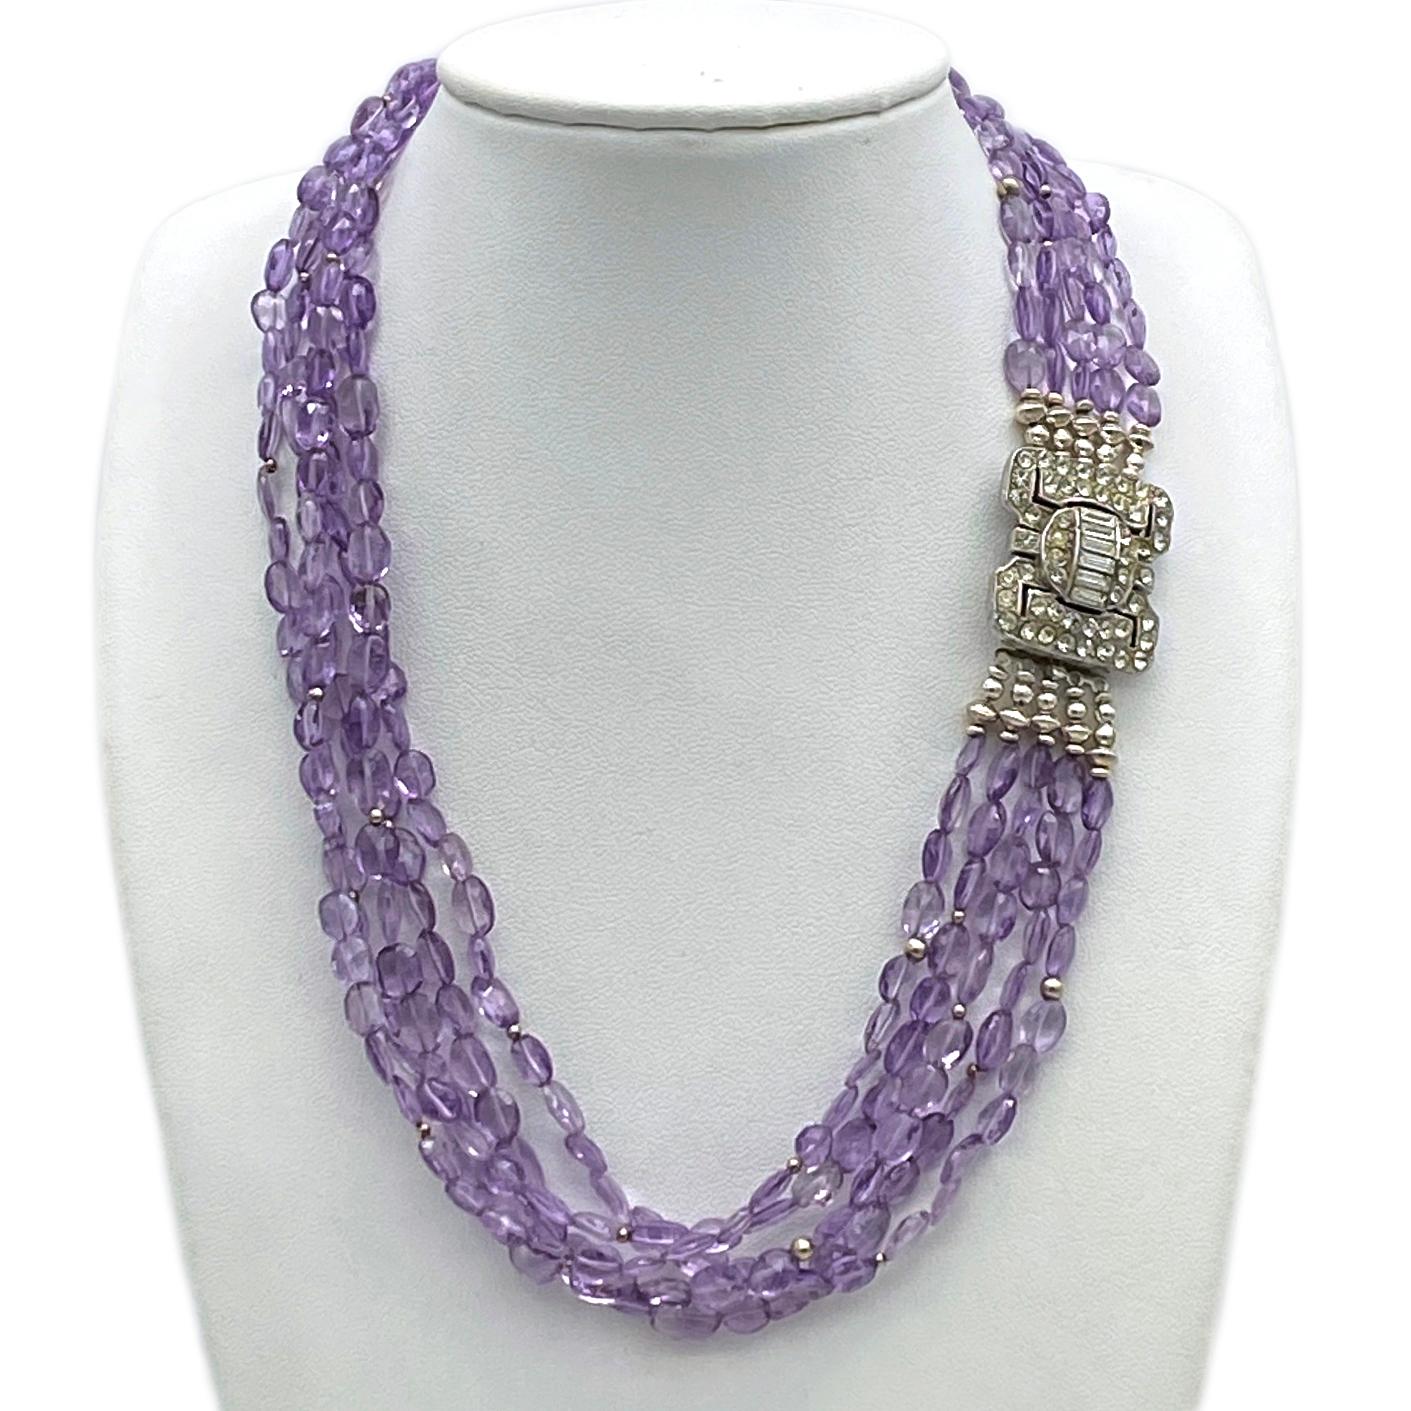 This is an Amethyst necklace with Art Deco clasp. We created this five-strand necklace with faceted amethyst translucent stones and sterling silver components. It features a vintage 1 x 1 x 0.5 inch Art Deco style clear rhinestone box clasp. Because